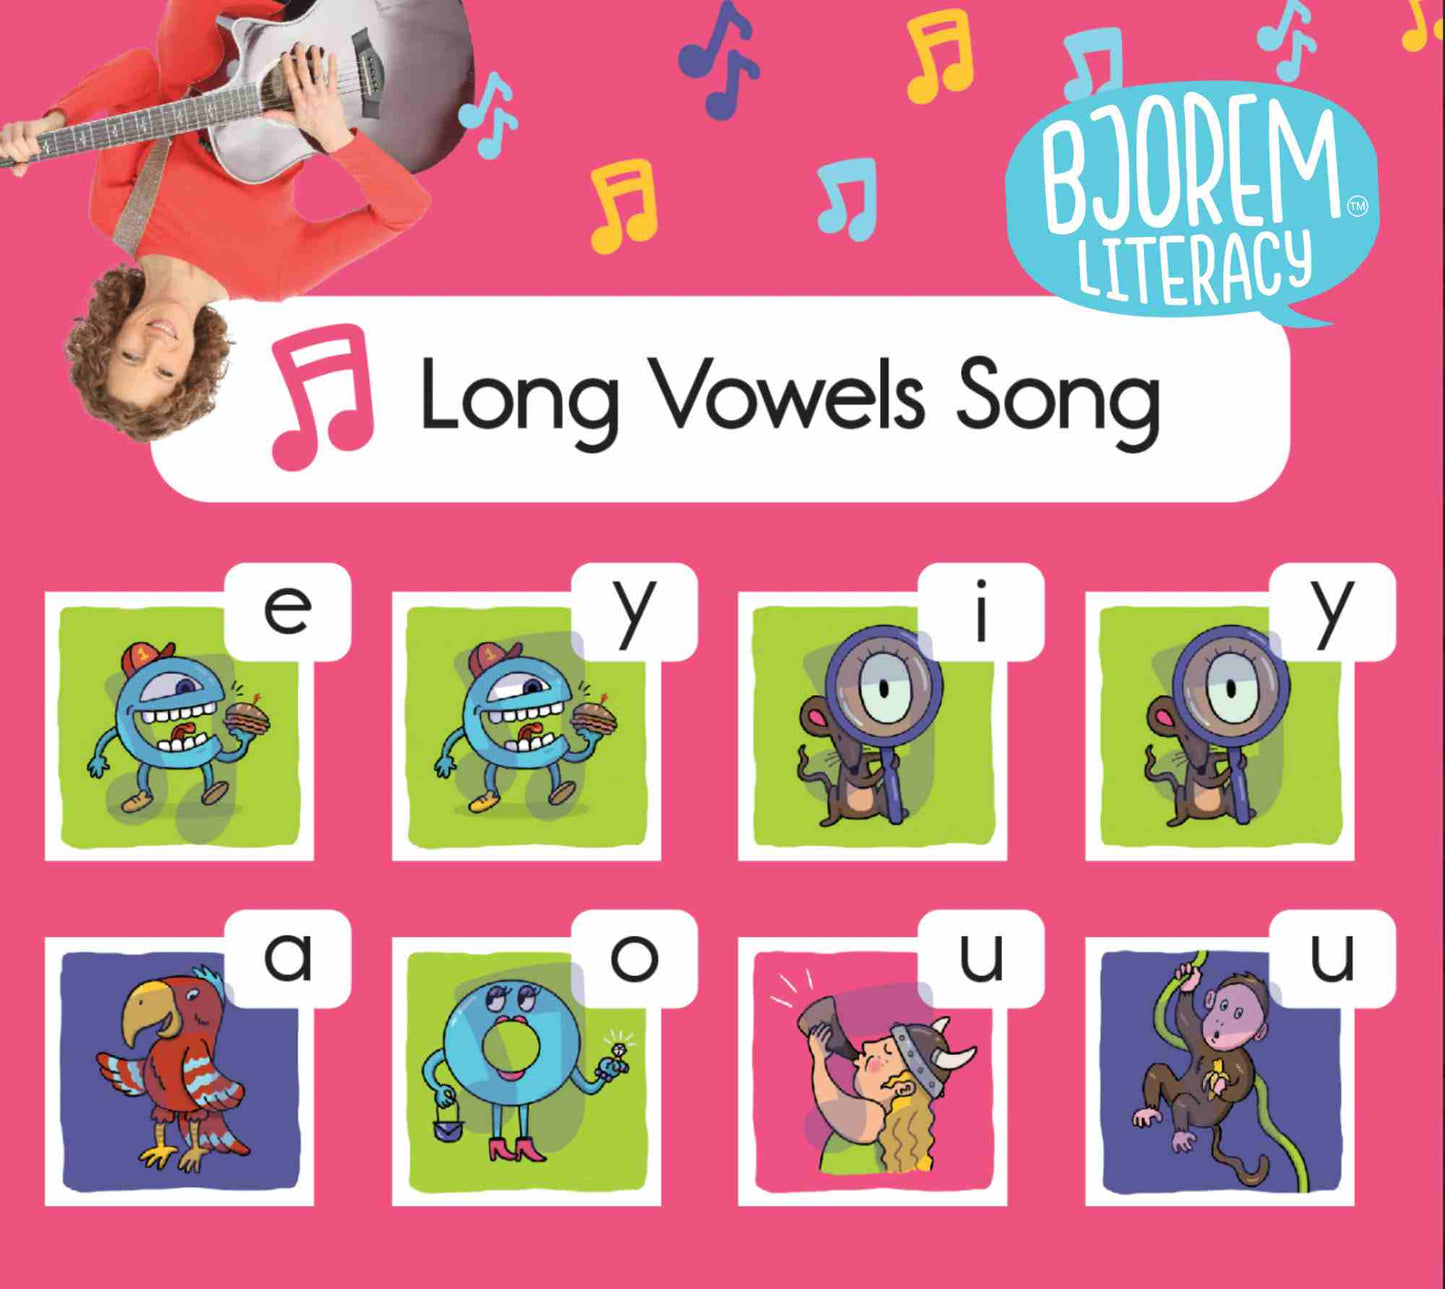 Bjorem Better Letters™ with The Laurie Berkner Band Card Deck